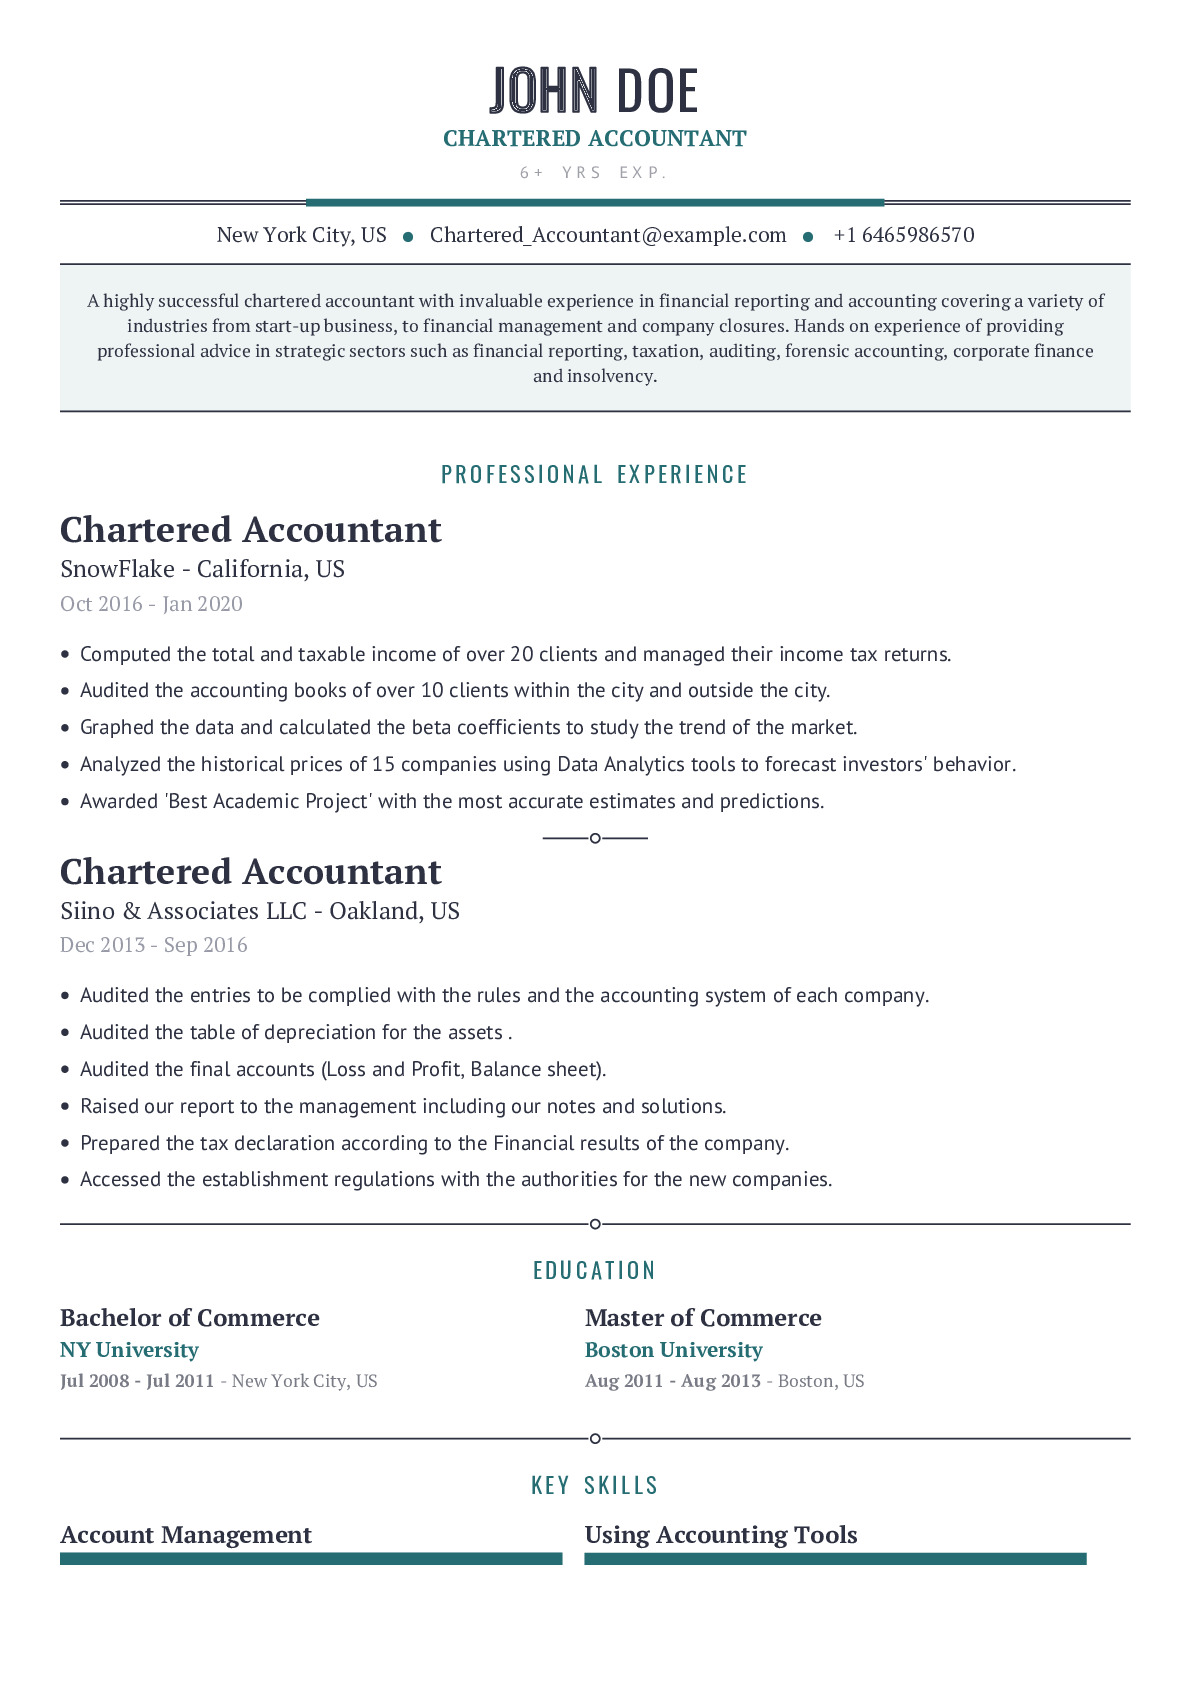 resume writing tips for chartered accountant